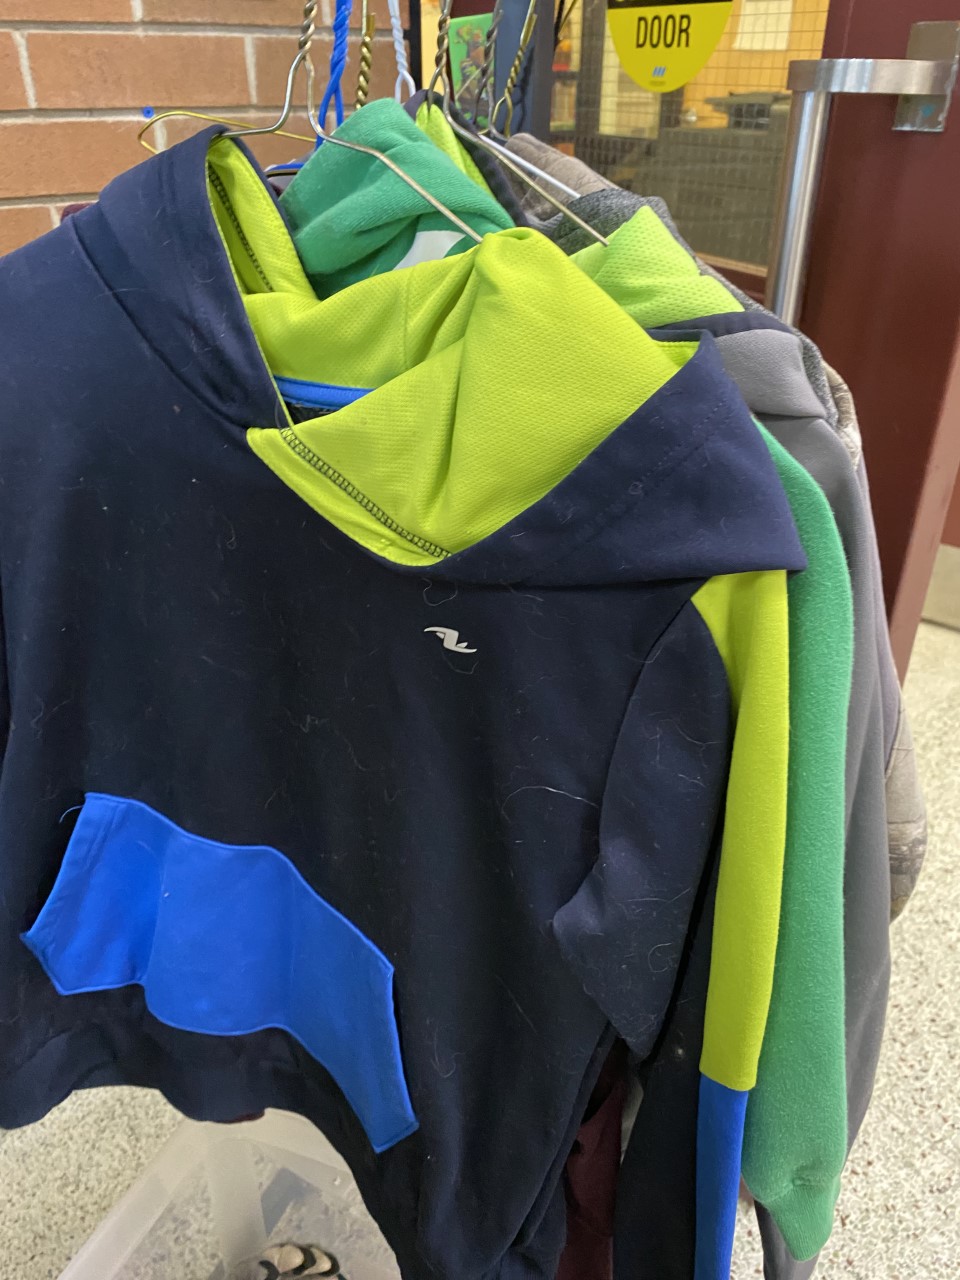 Lost and Found – January 2023 (Minto-Clifford Public School)